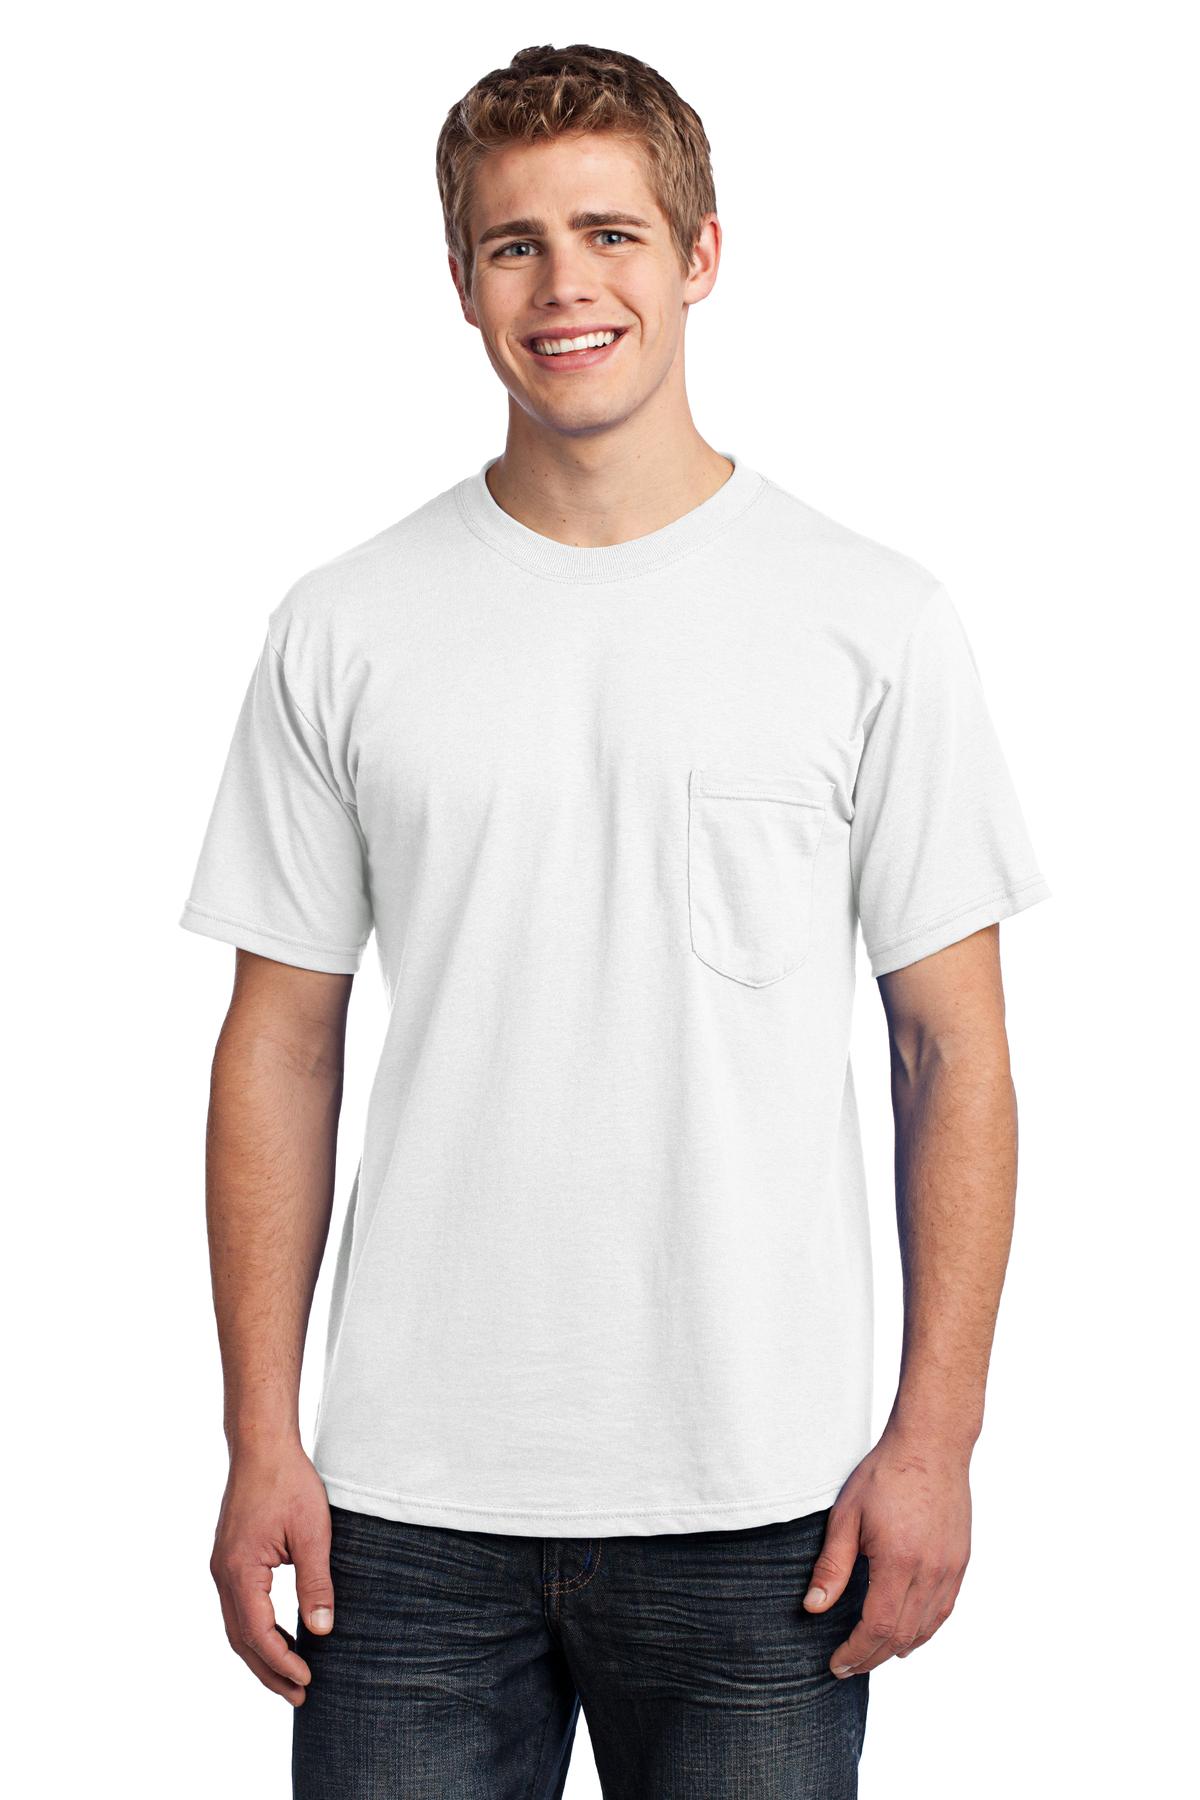 Port & Company Mens All-American T-Shirt with Pocket 